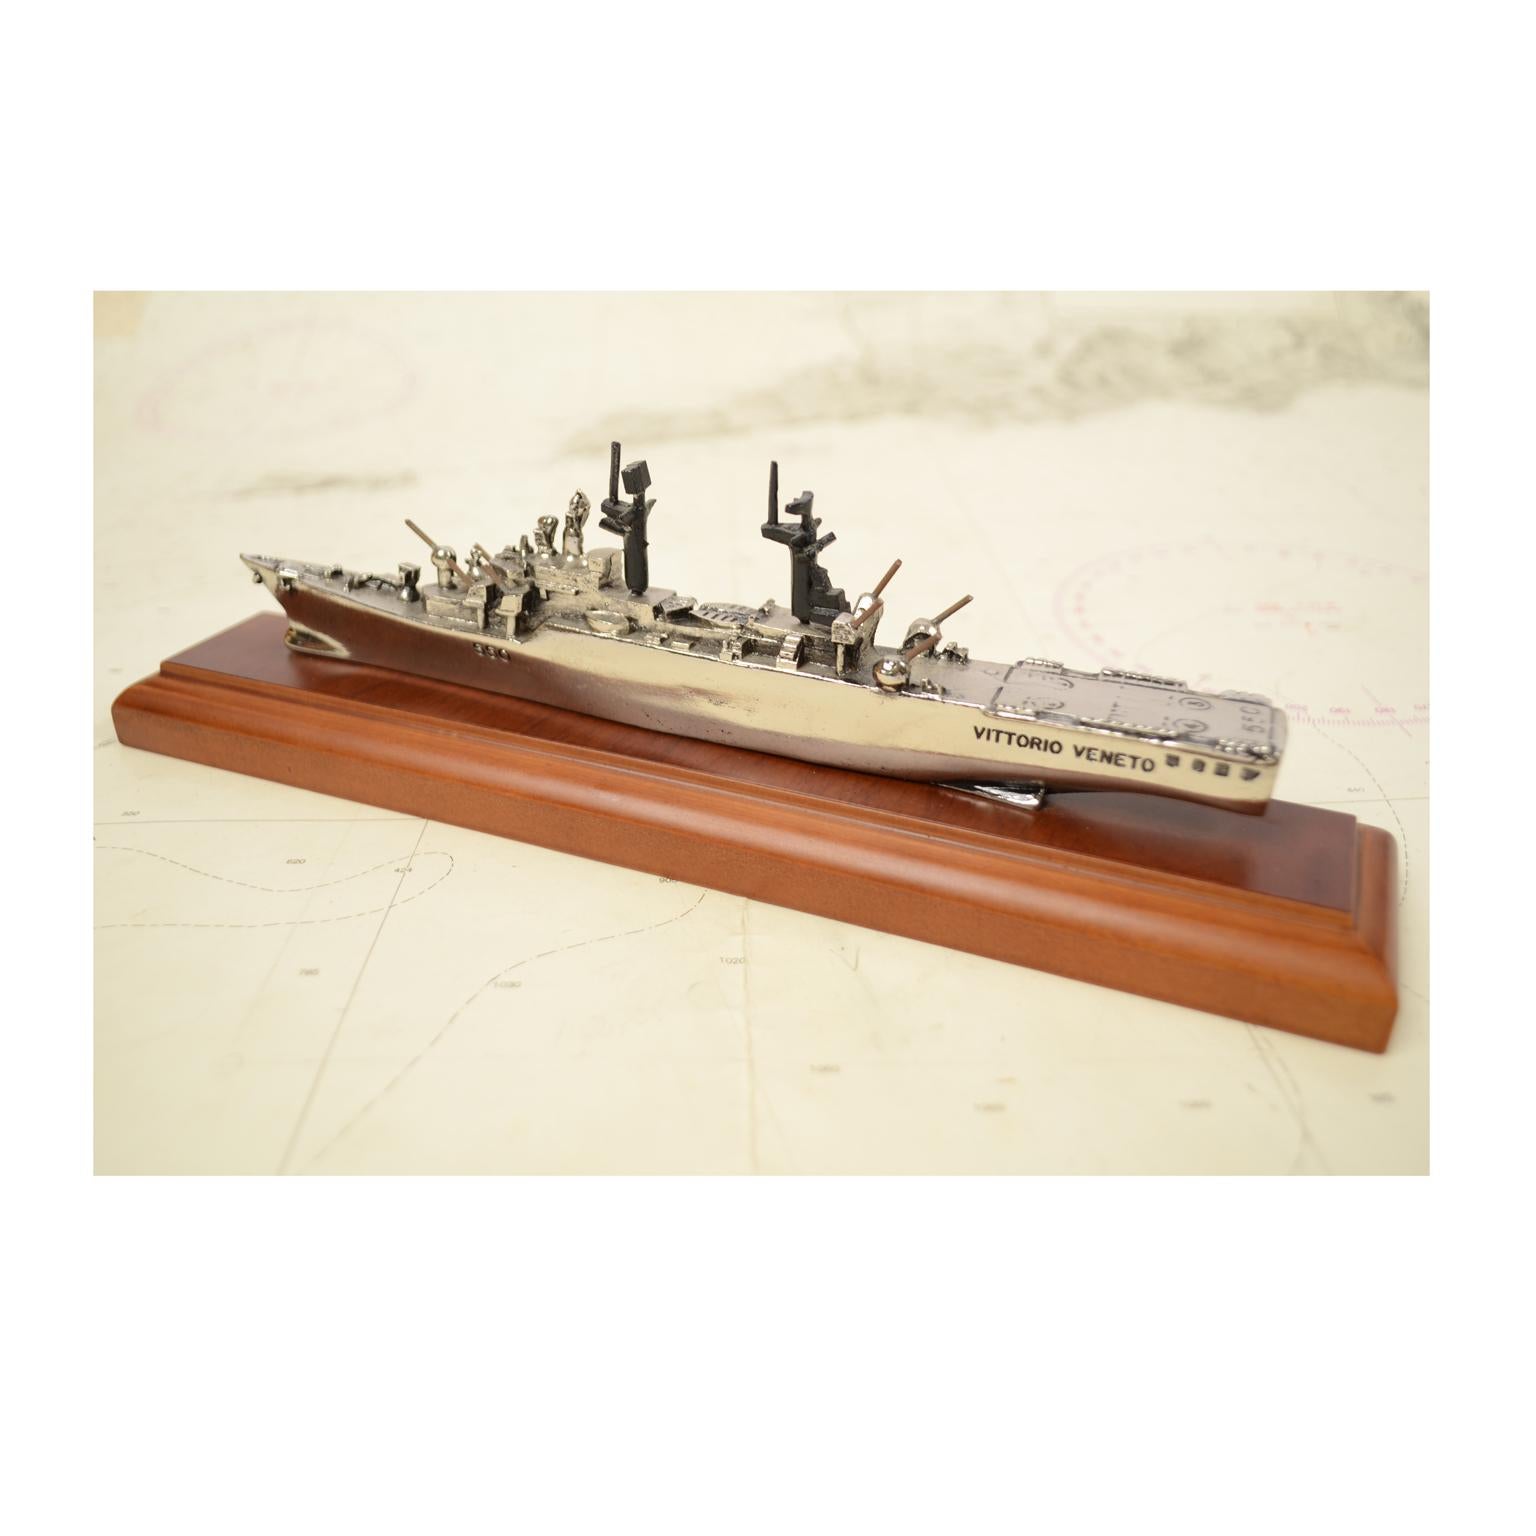 Scale model made of Zama of the missile launcher and helicopter holder Vittorio Veneto C550, built by Navalmeccanica and launched in 1967. The ship has been disarmed since 2006. Measures 26 x 5 cm H 8. Very good condition.